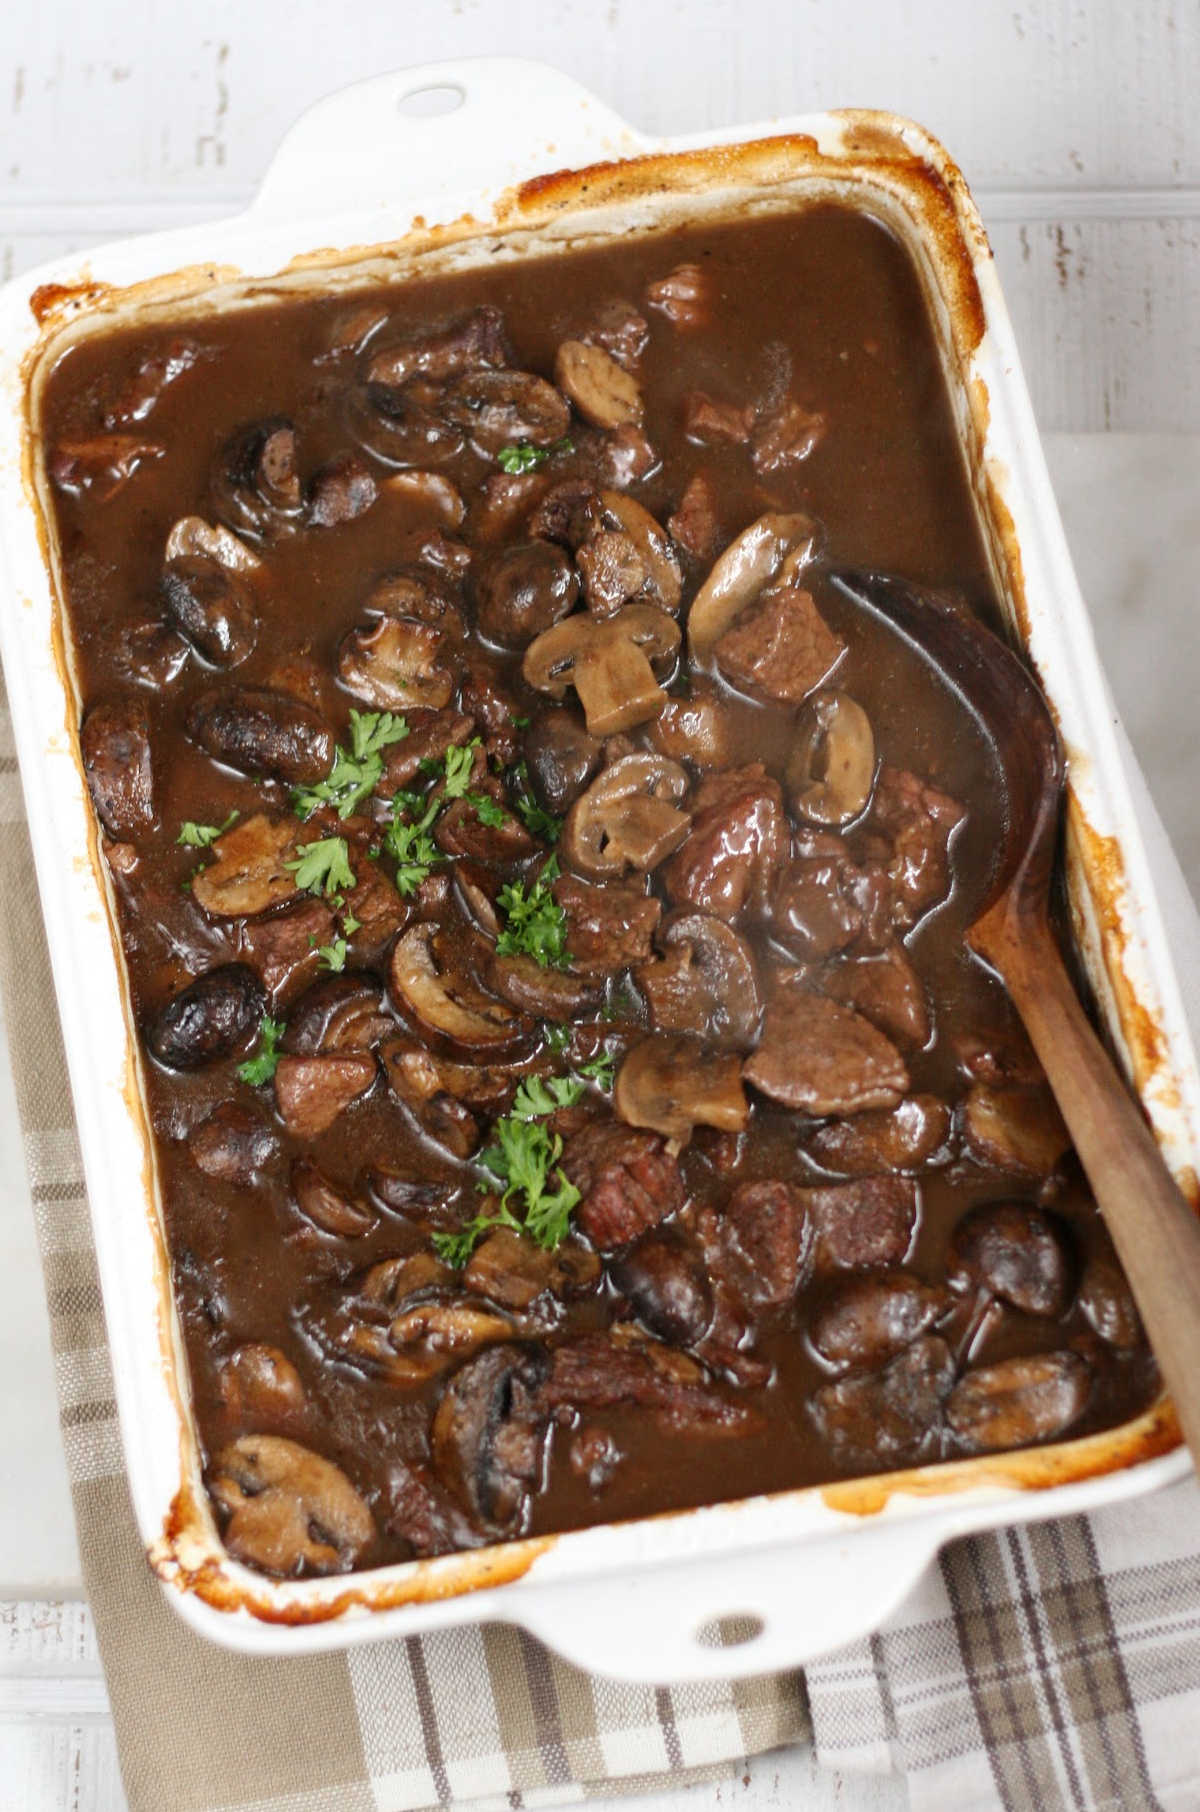 Beef tips gravy and mushrooms in white rectangle baking dish.